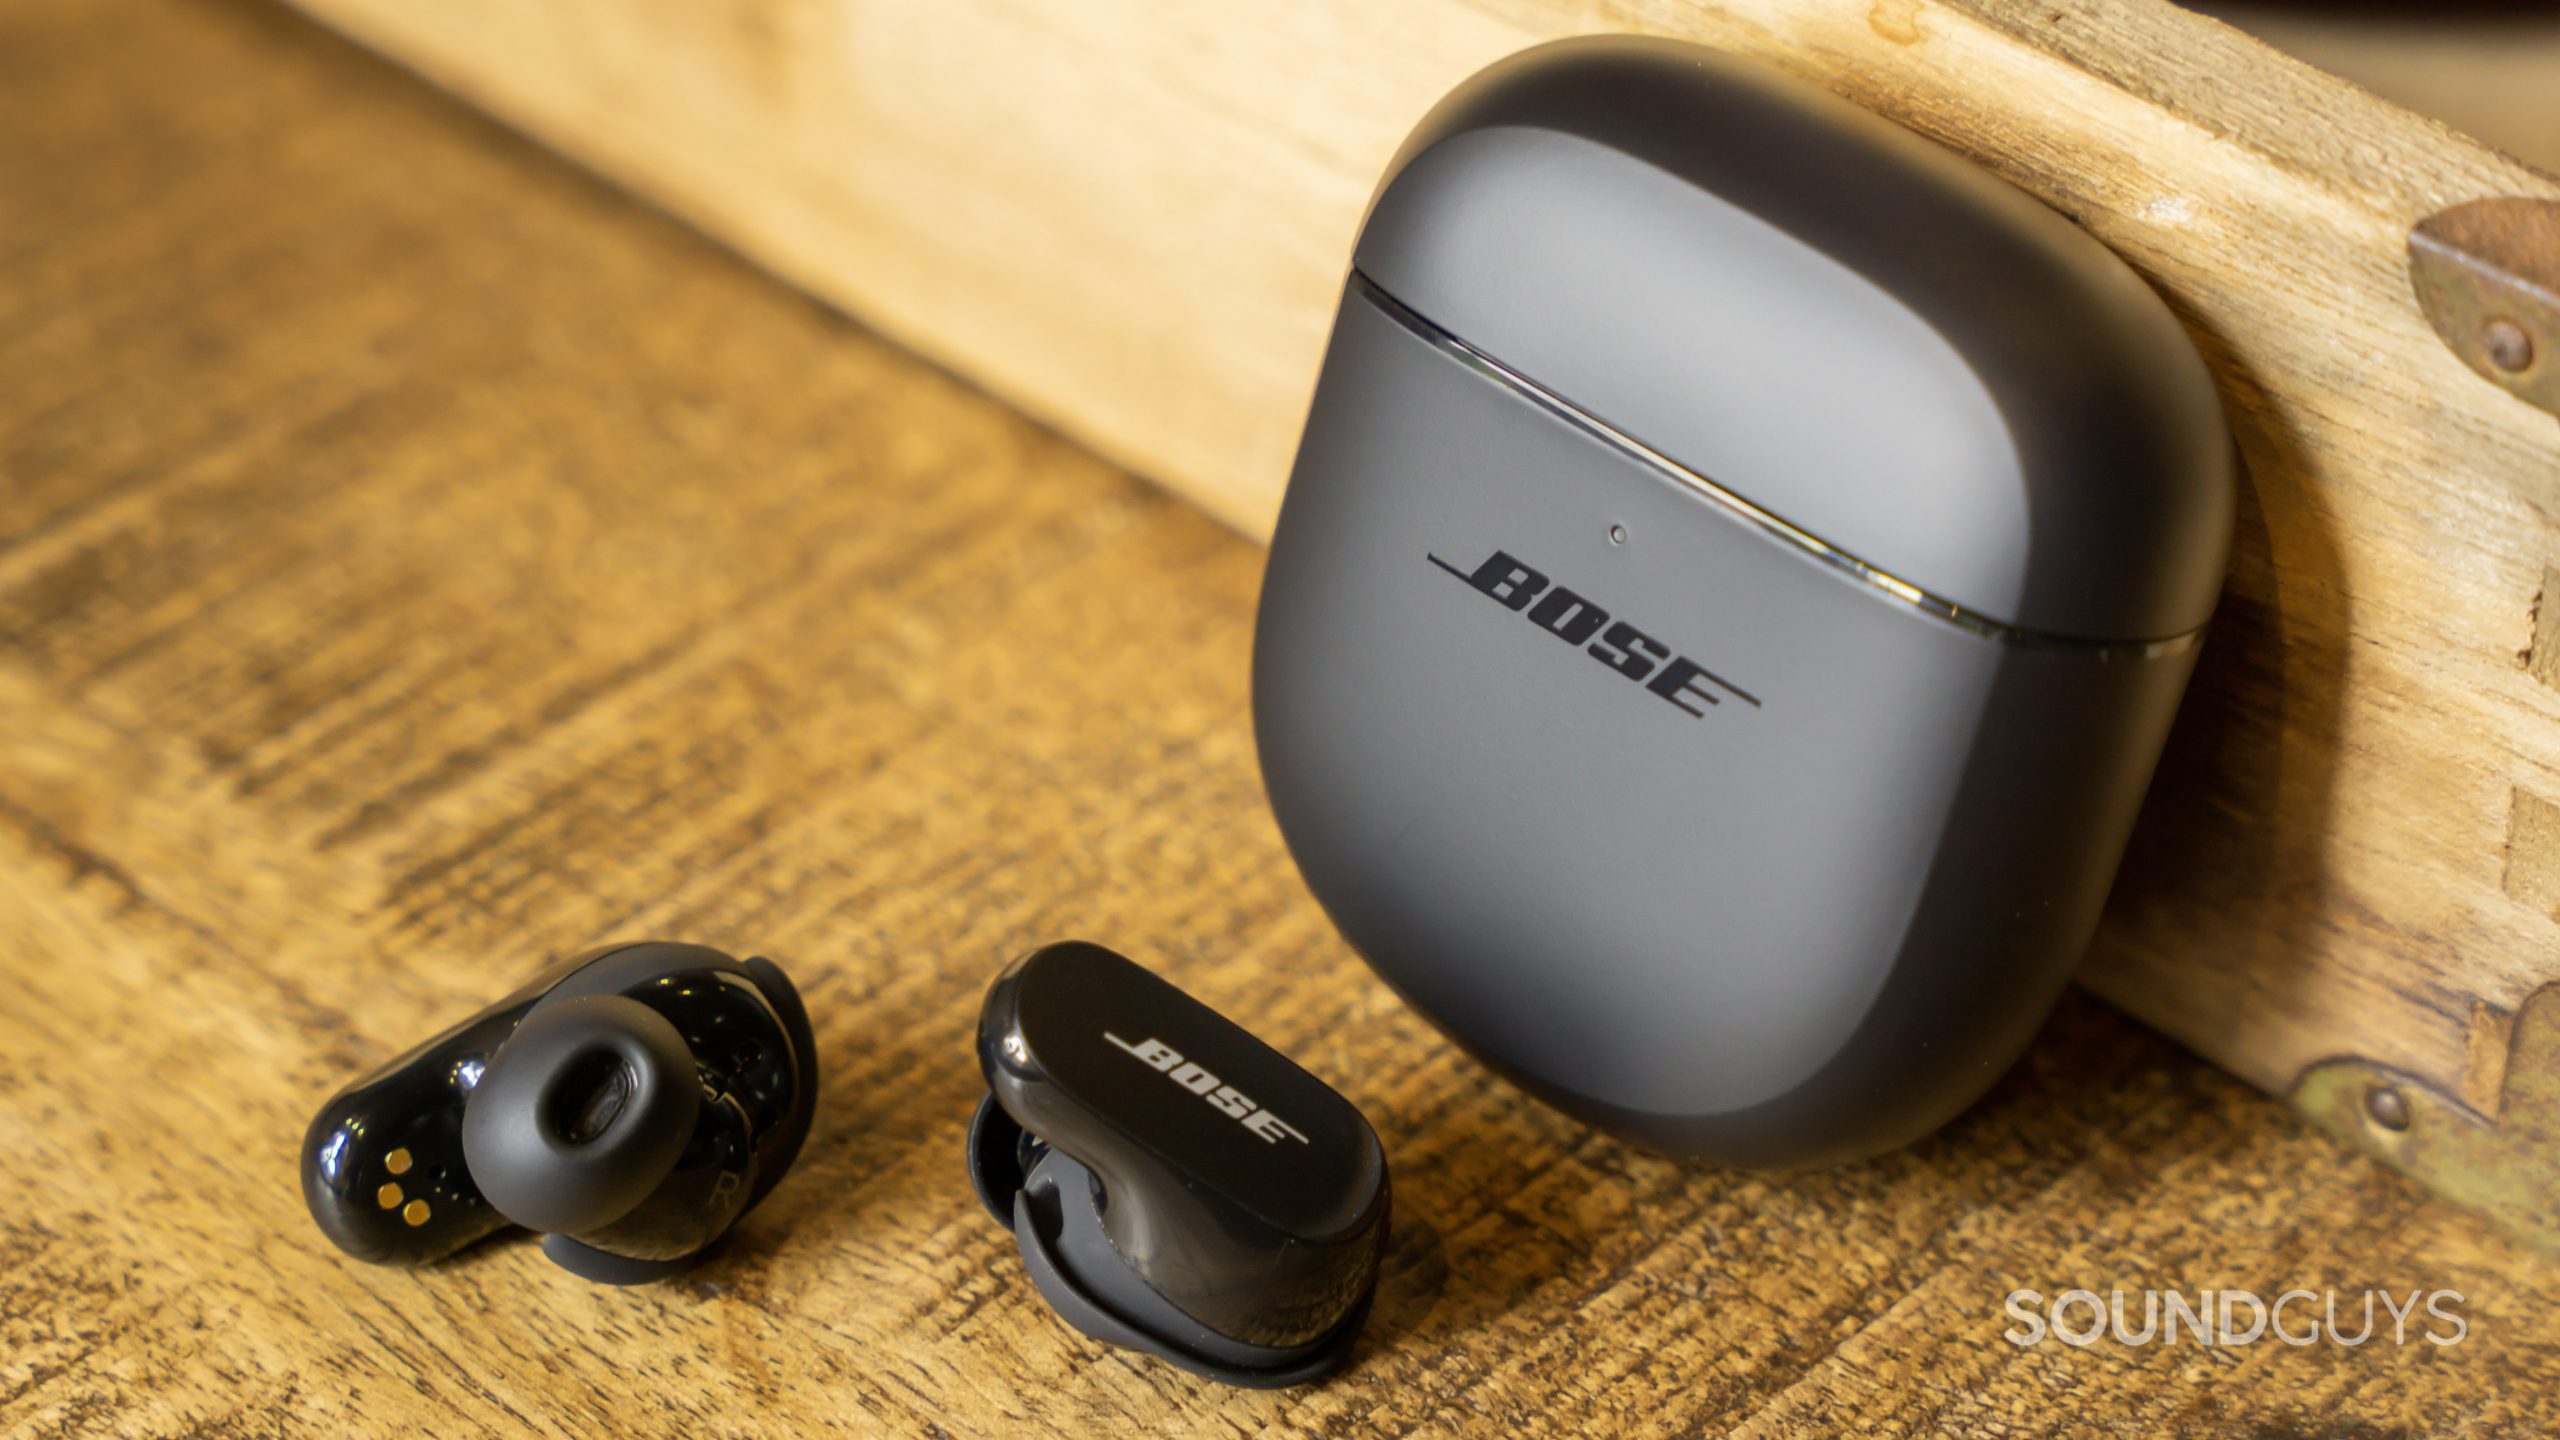 Propped against a wood surface the case of the Bose QuietComfort Earbuds II stands up with the buds out, showing the outside and inside faces of the housing.